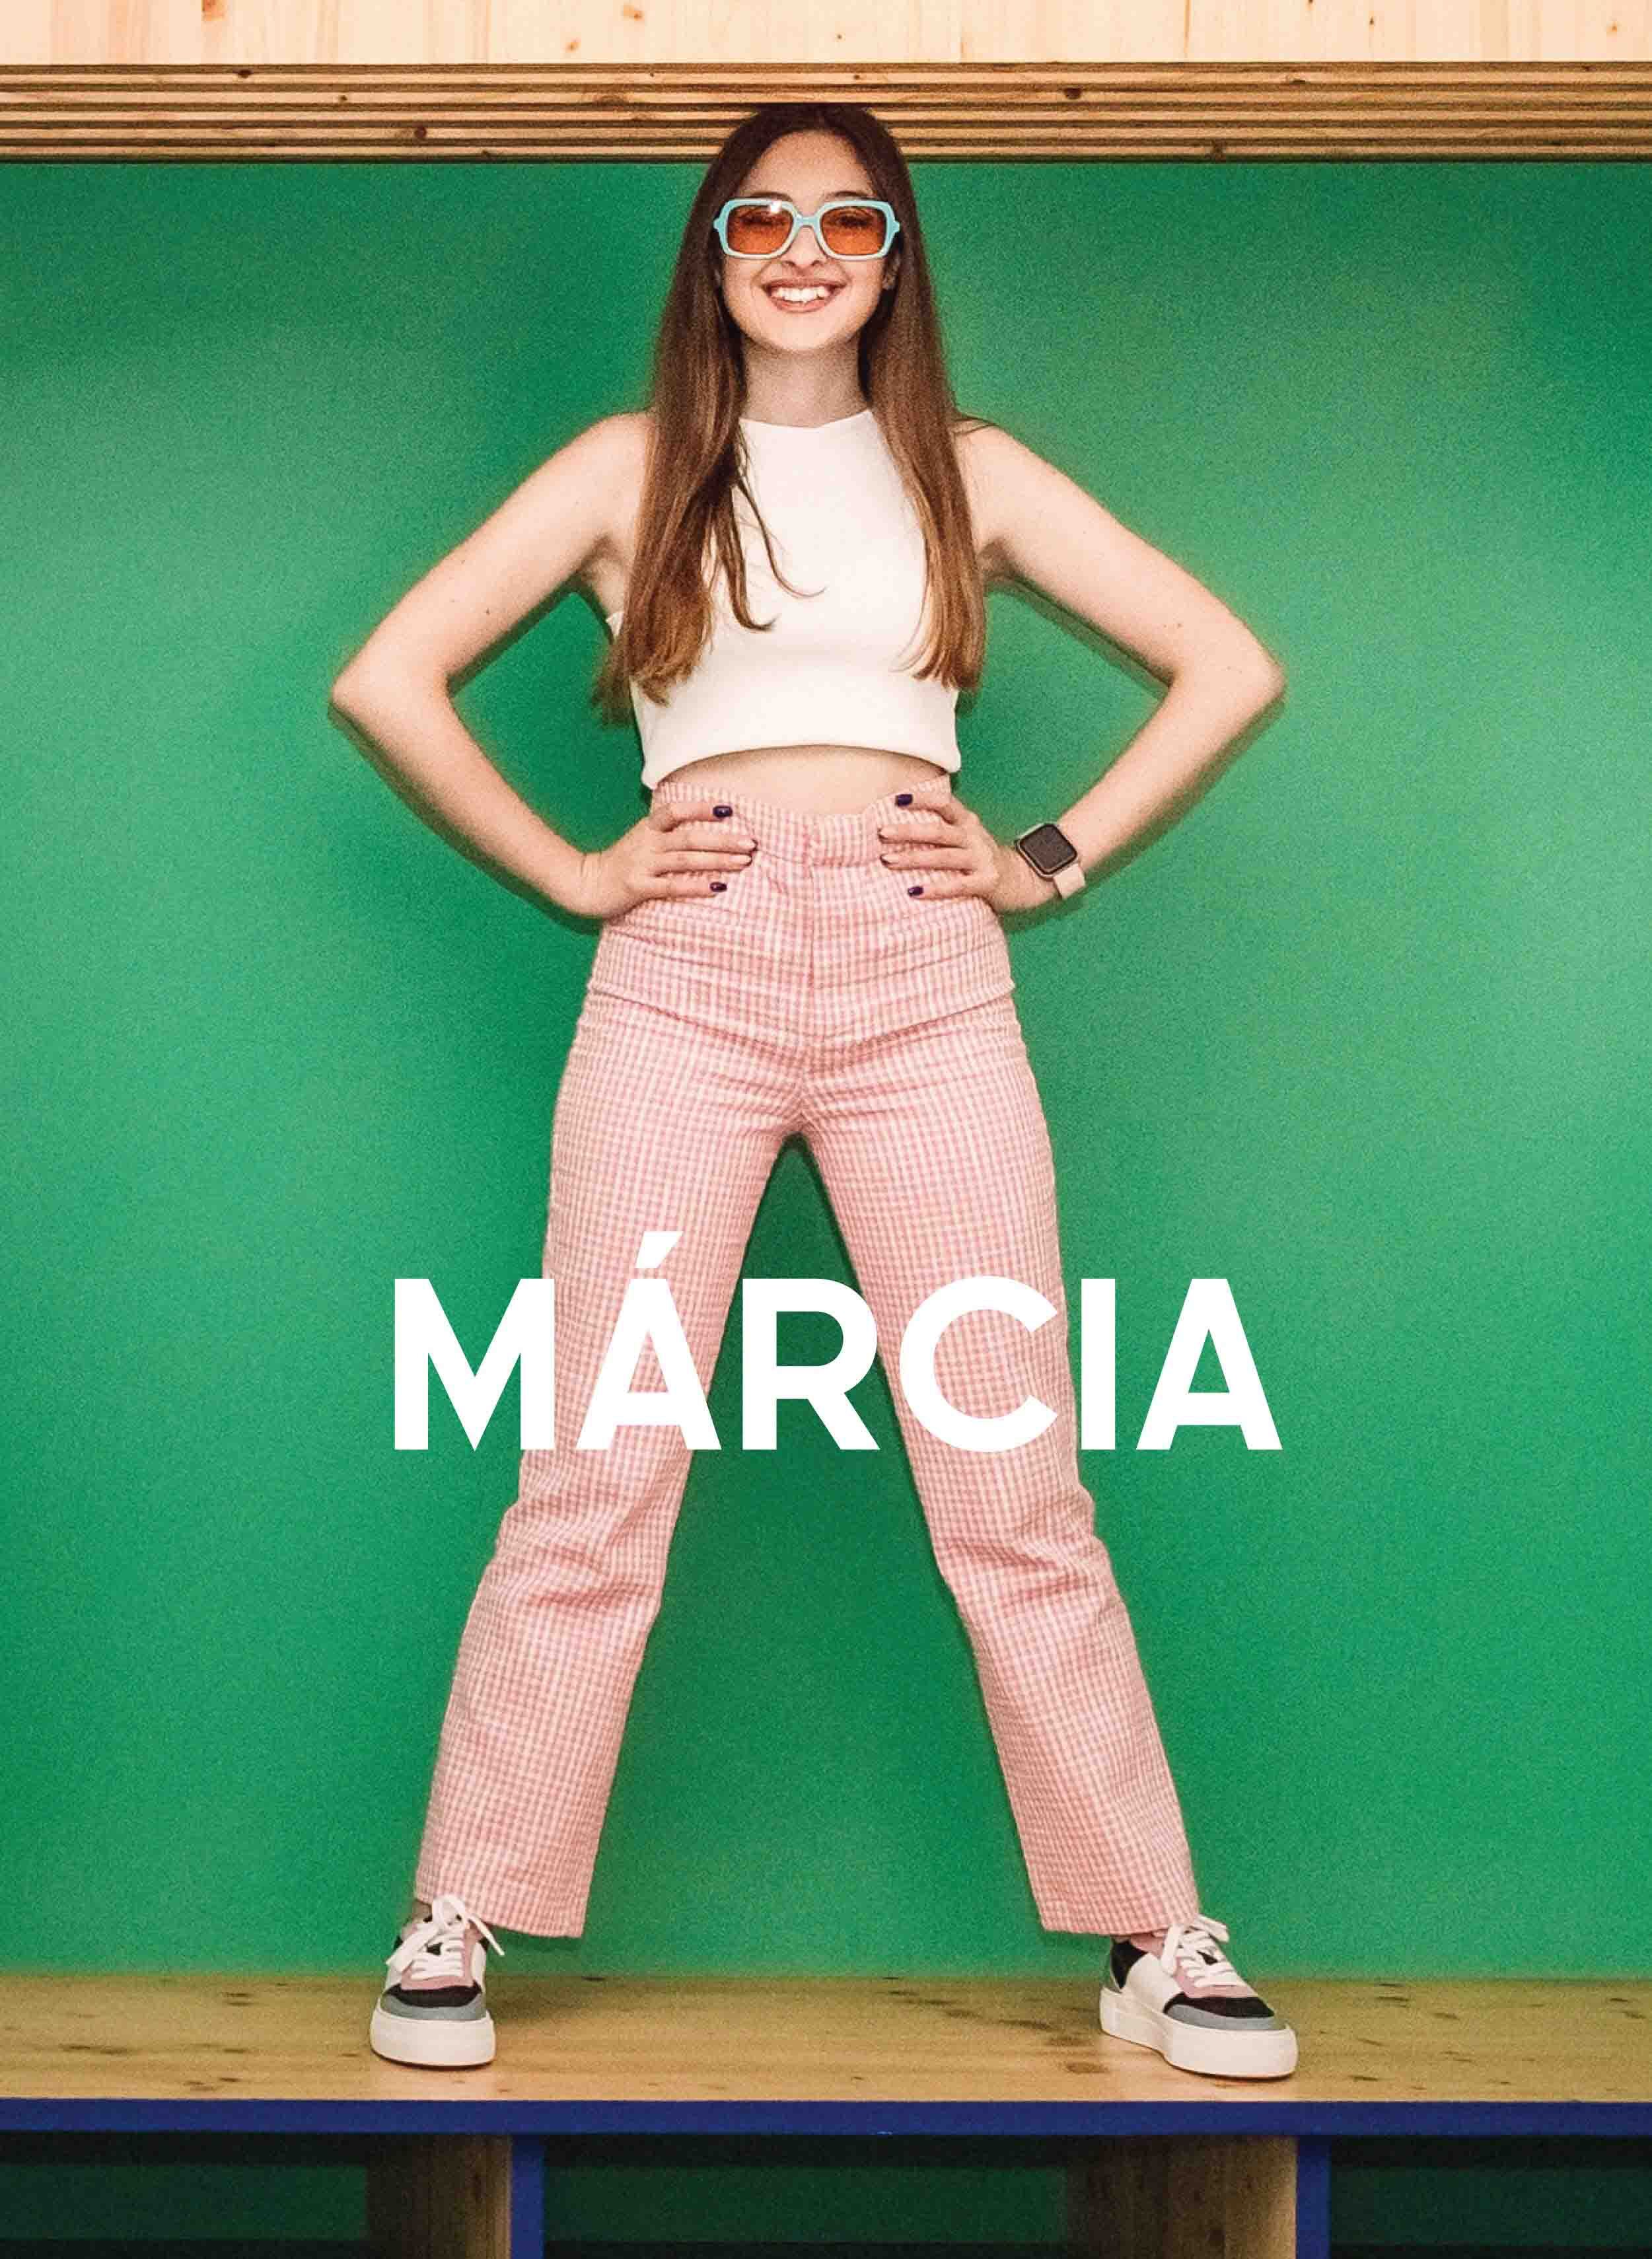 Márcia in a white top and red checked trousers, smiling with her hand on her waist, wearing Diverge sneakers, promoting social impact and custom shoes throught the imagine project.